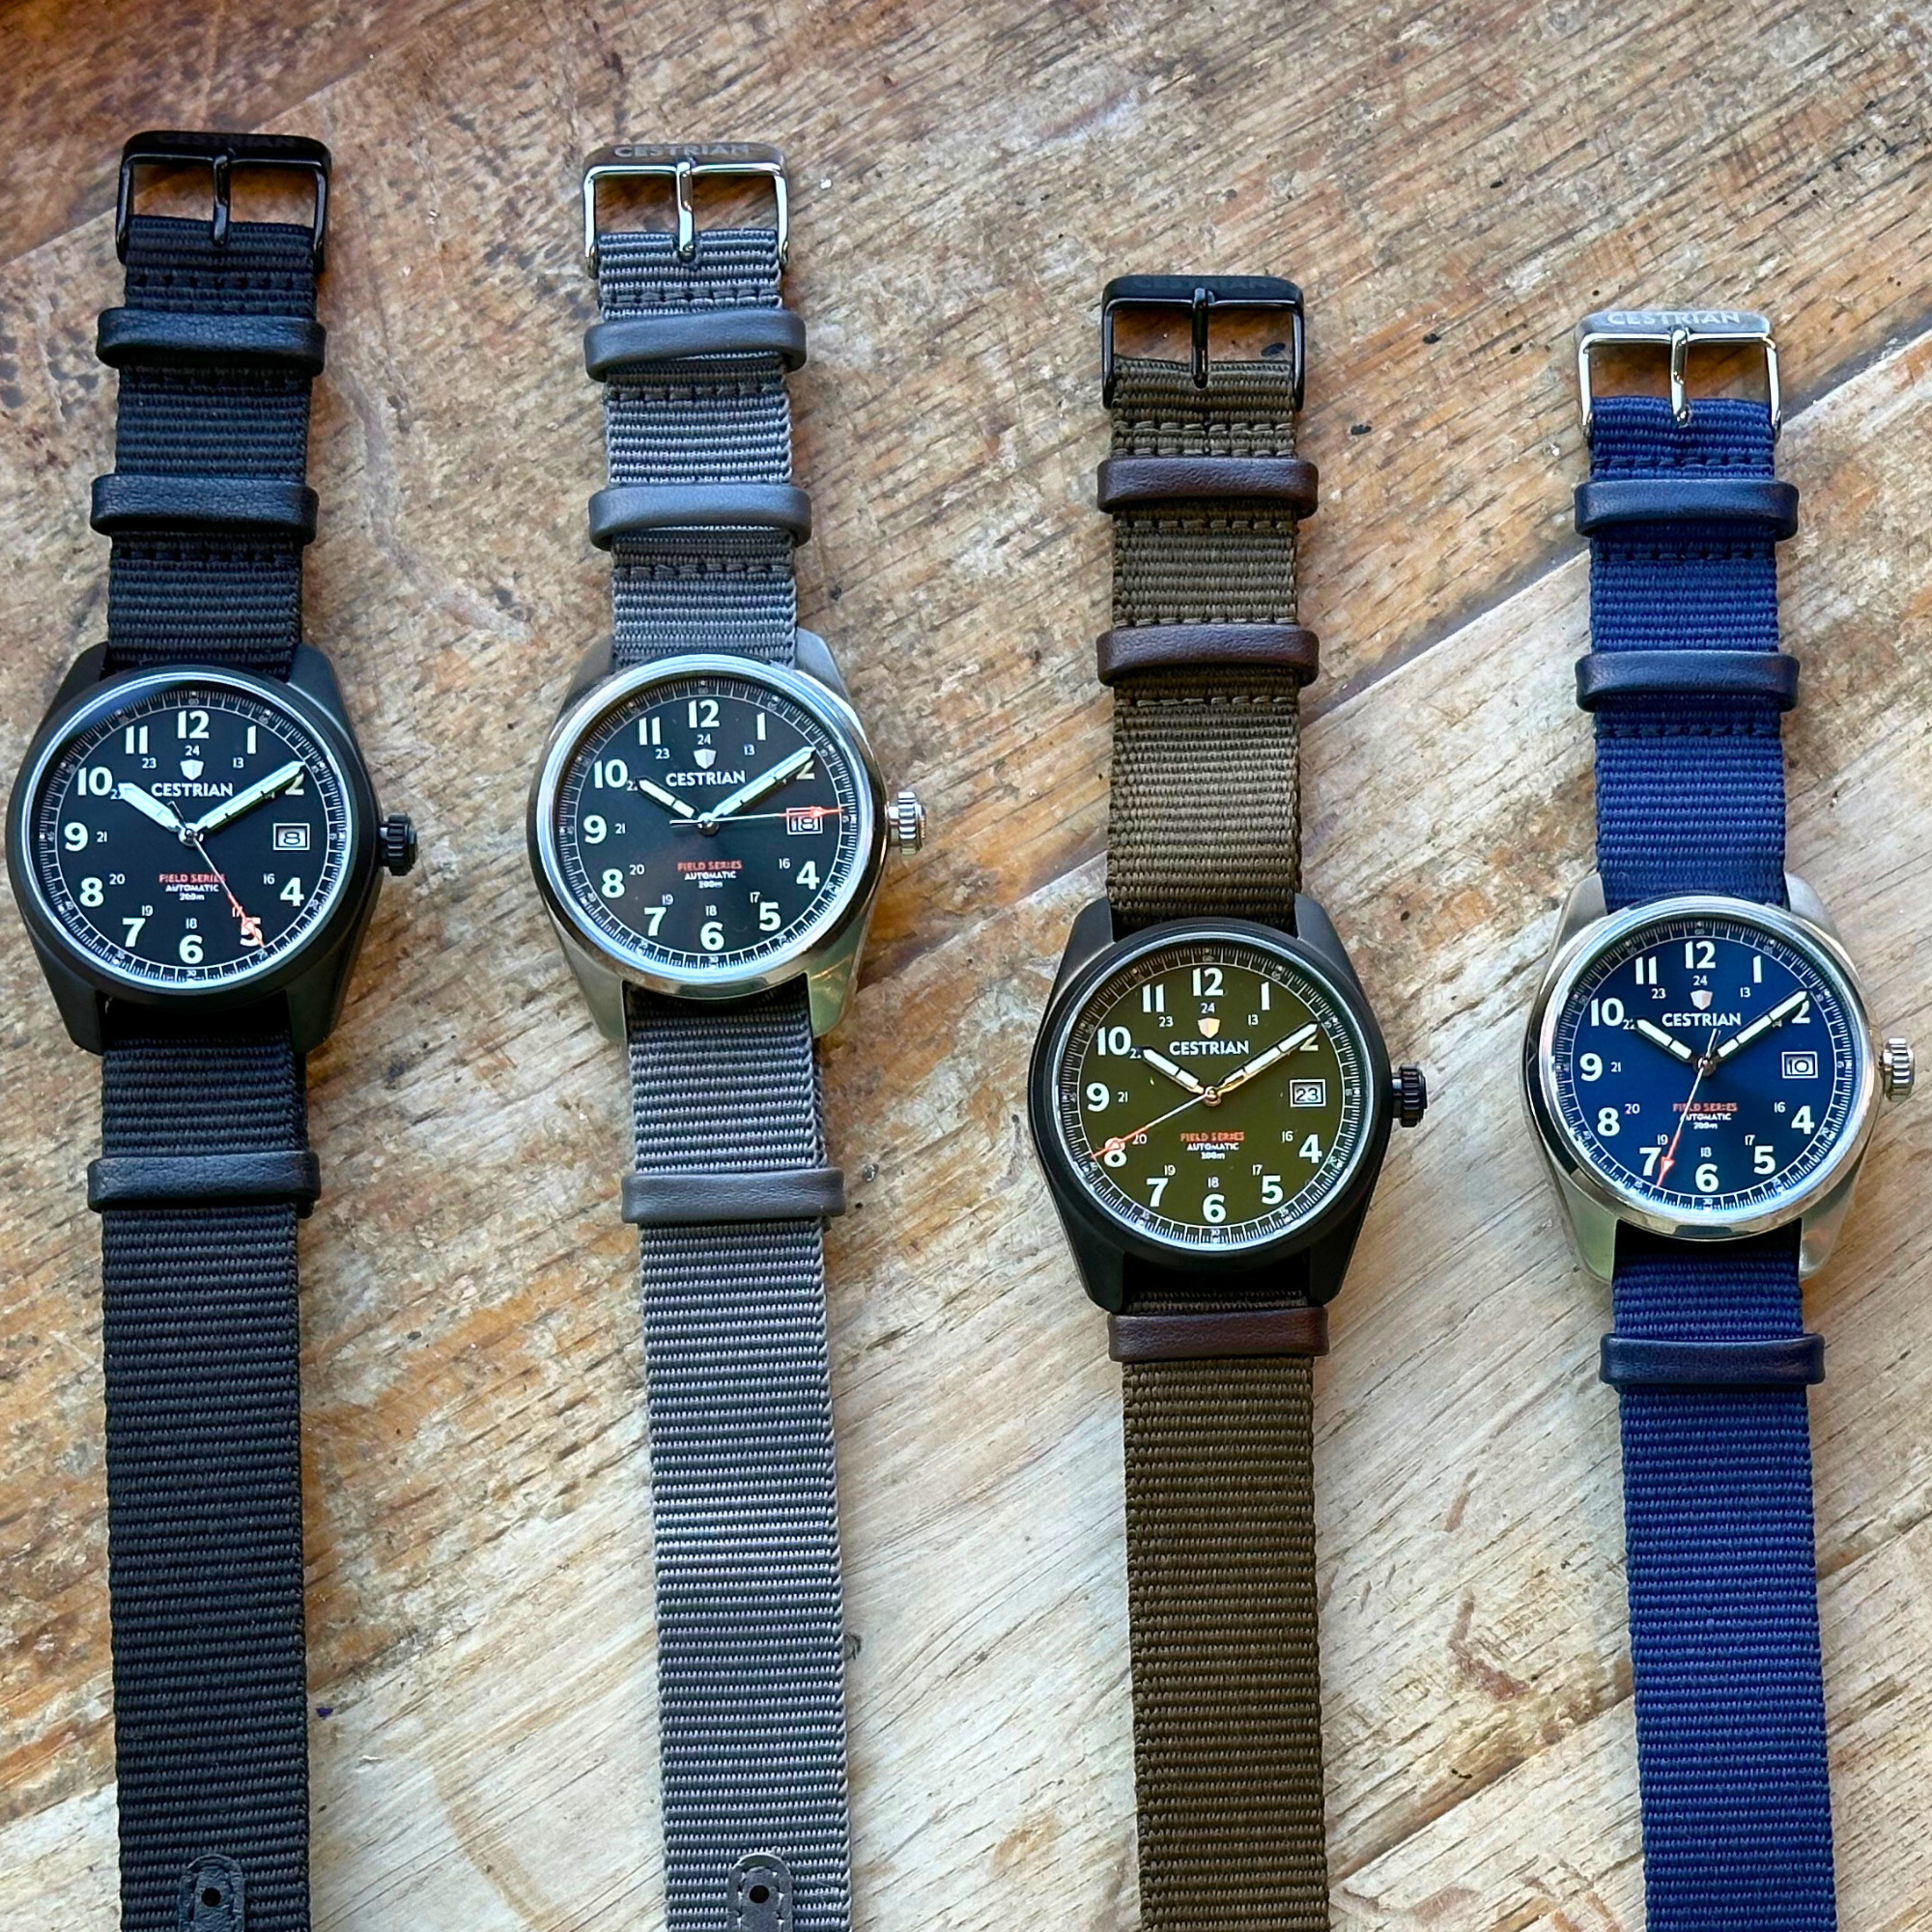 From Battlefields to City Streets: The Evolution of the Iconic NATO Strap